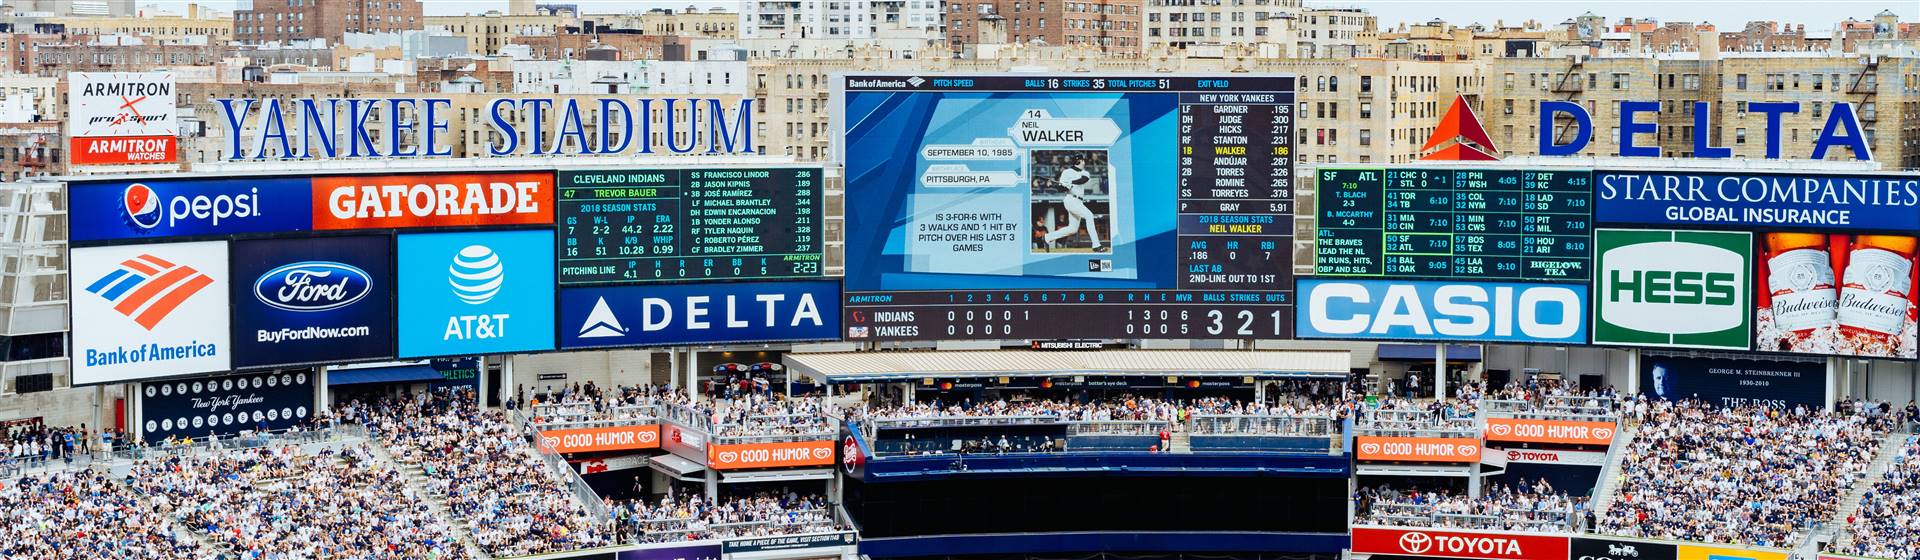 Seeing New York Yankees play  Baltimore Orioles is not to be missed. Join in for a great day out!